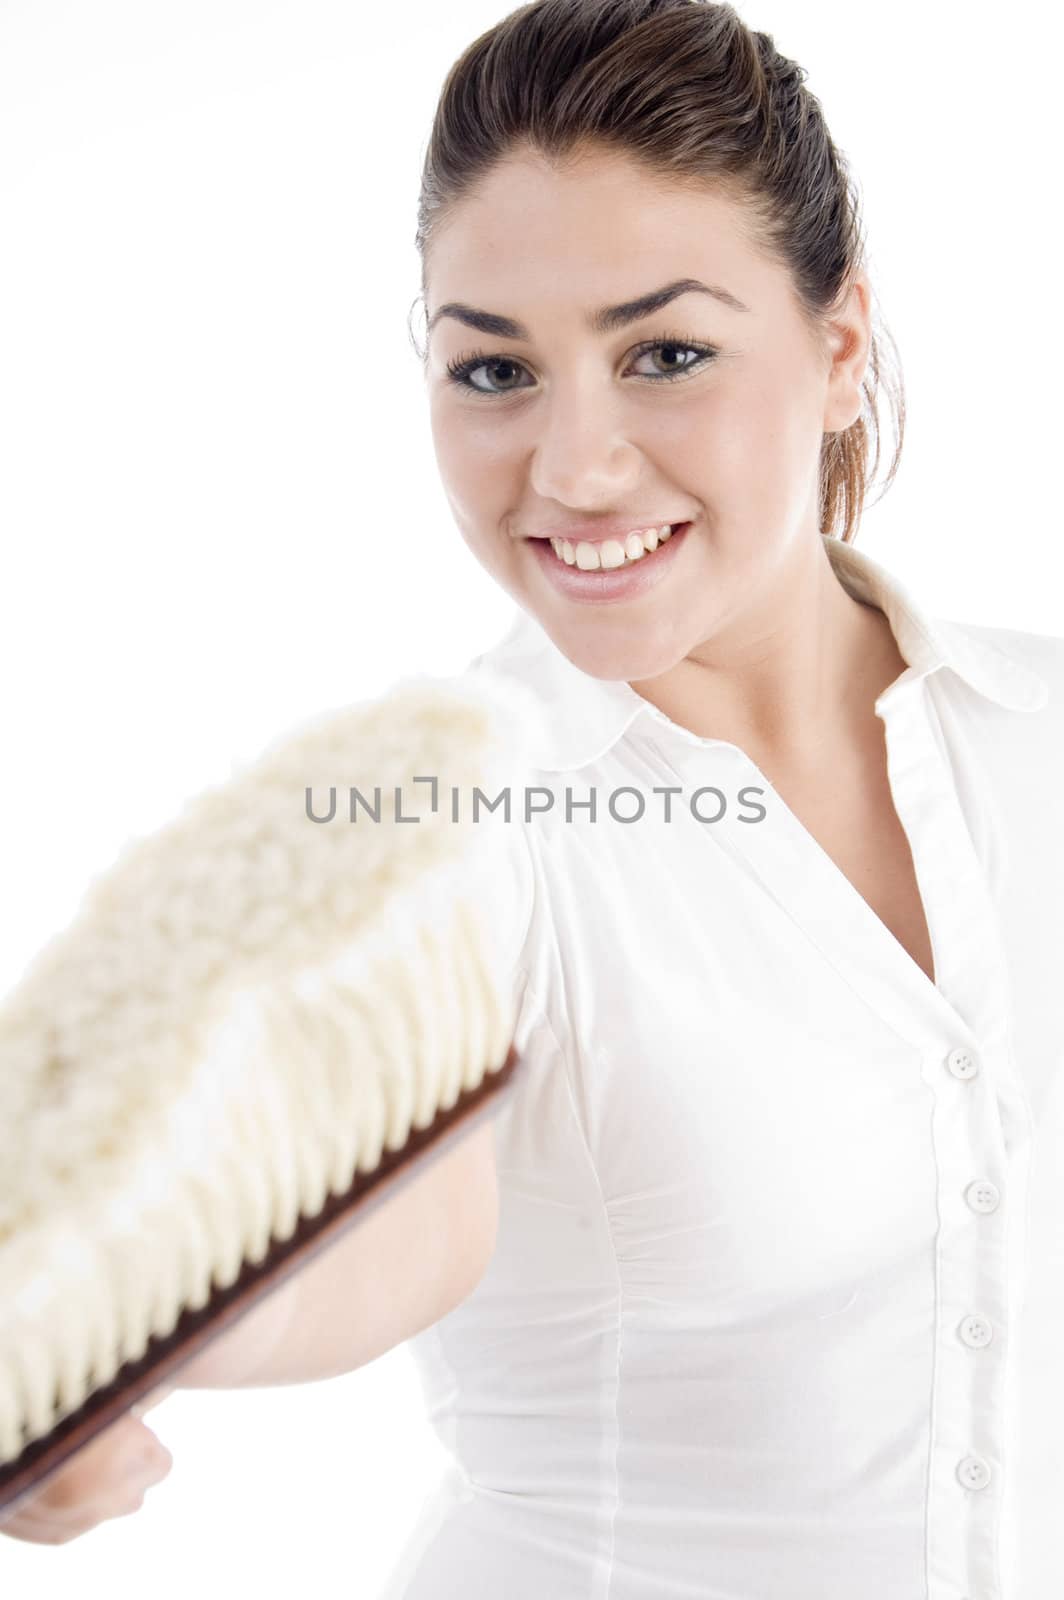 smiling girl holding cleaning brush by imagerymajestic